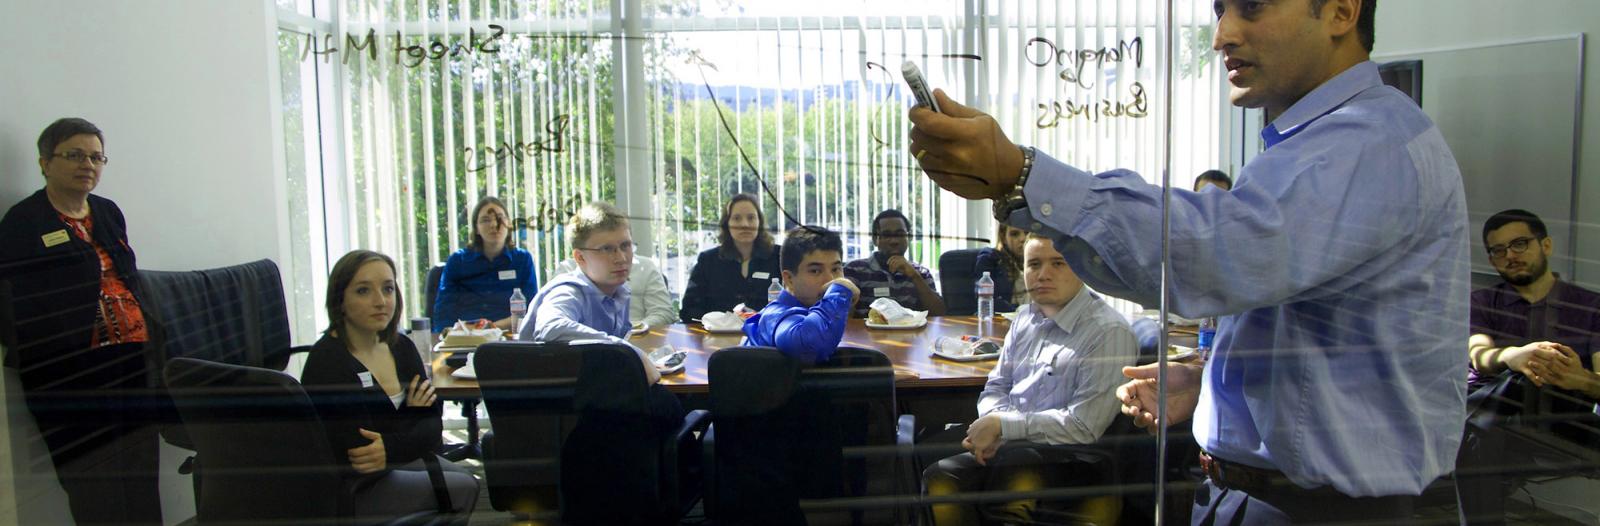 Students sit at conference table during Silicon Valley industry trek.